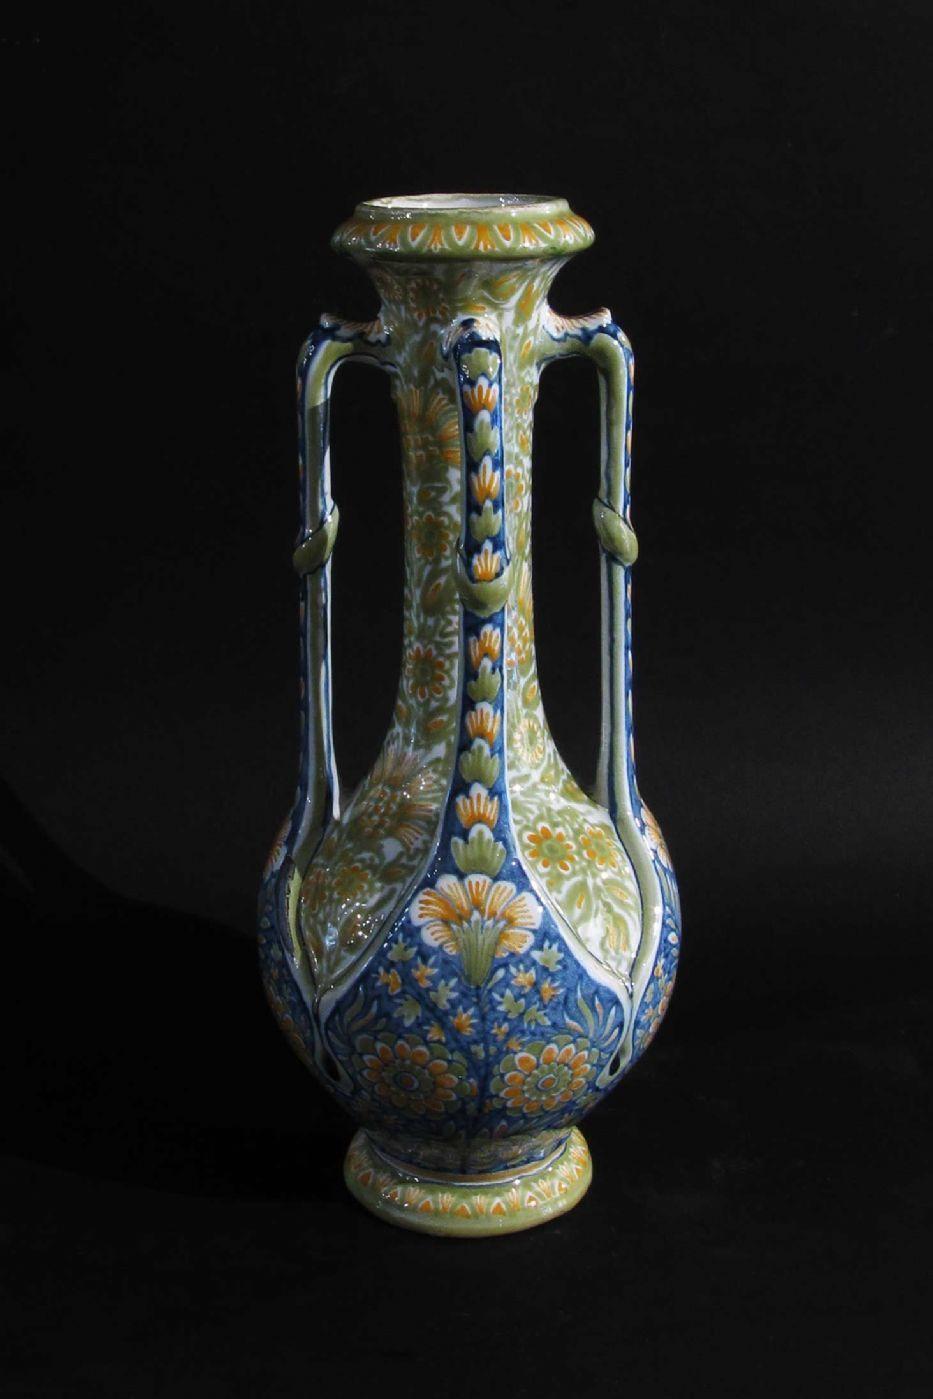 Characteristic four-handled polychrome majolica vase born from the artistic collaboration of Gibus and M. Redon. The object represents a fusion of Neo-Renaissance and Art Nouveau features. Mark bearing the monogram of the artistic collaboration